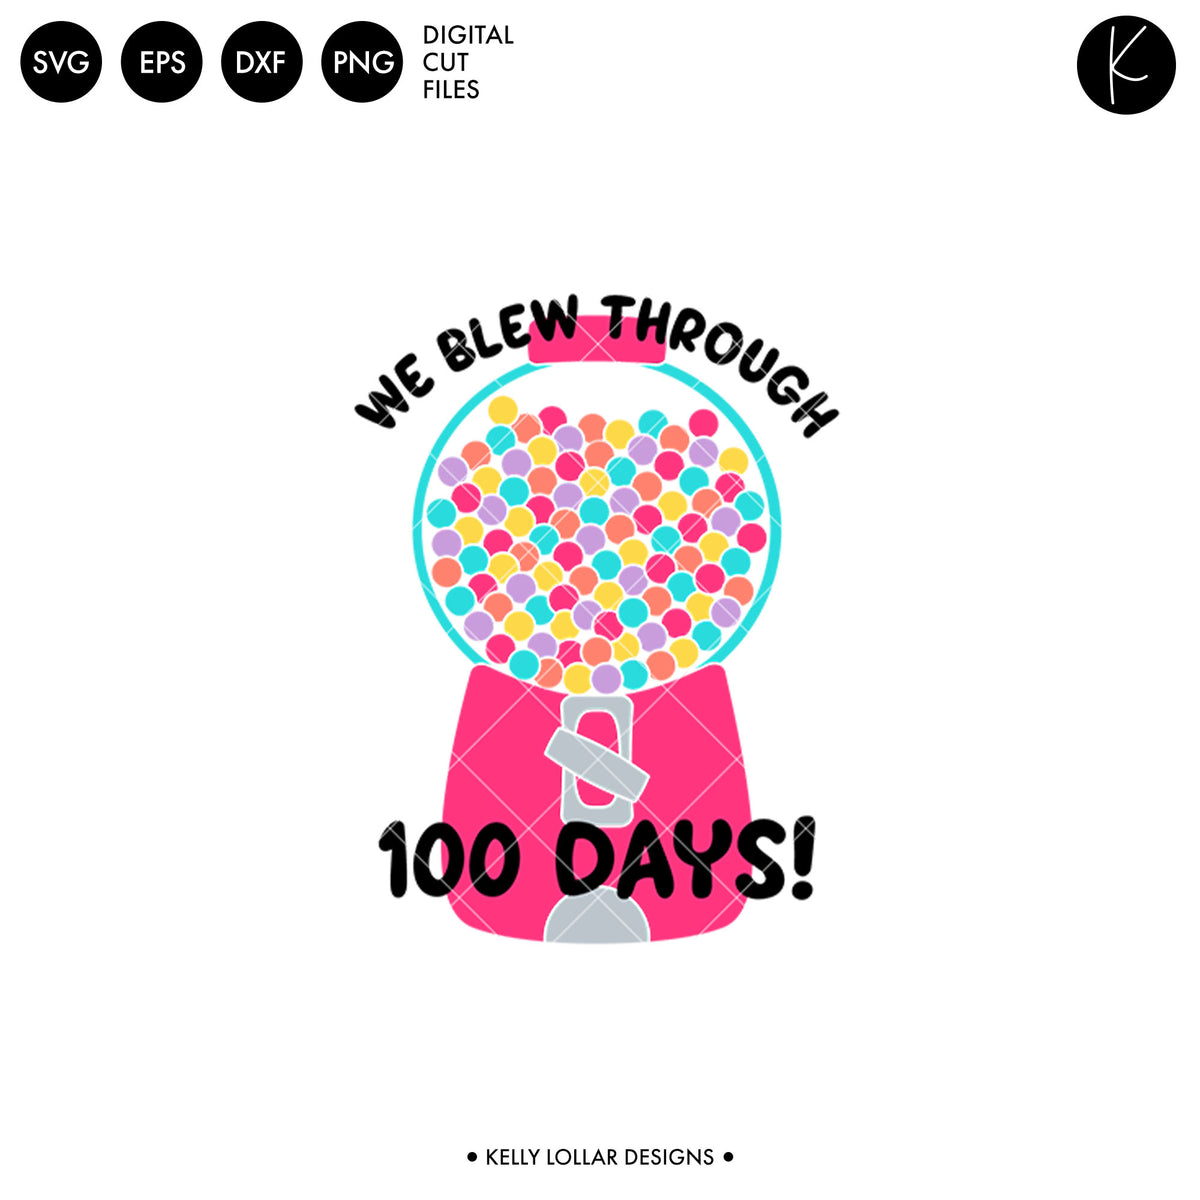 We Blew Through 100 Days | SVG DXF EPS PNG Cut Files